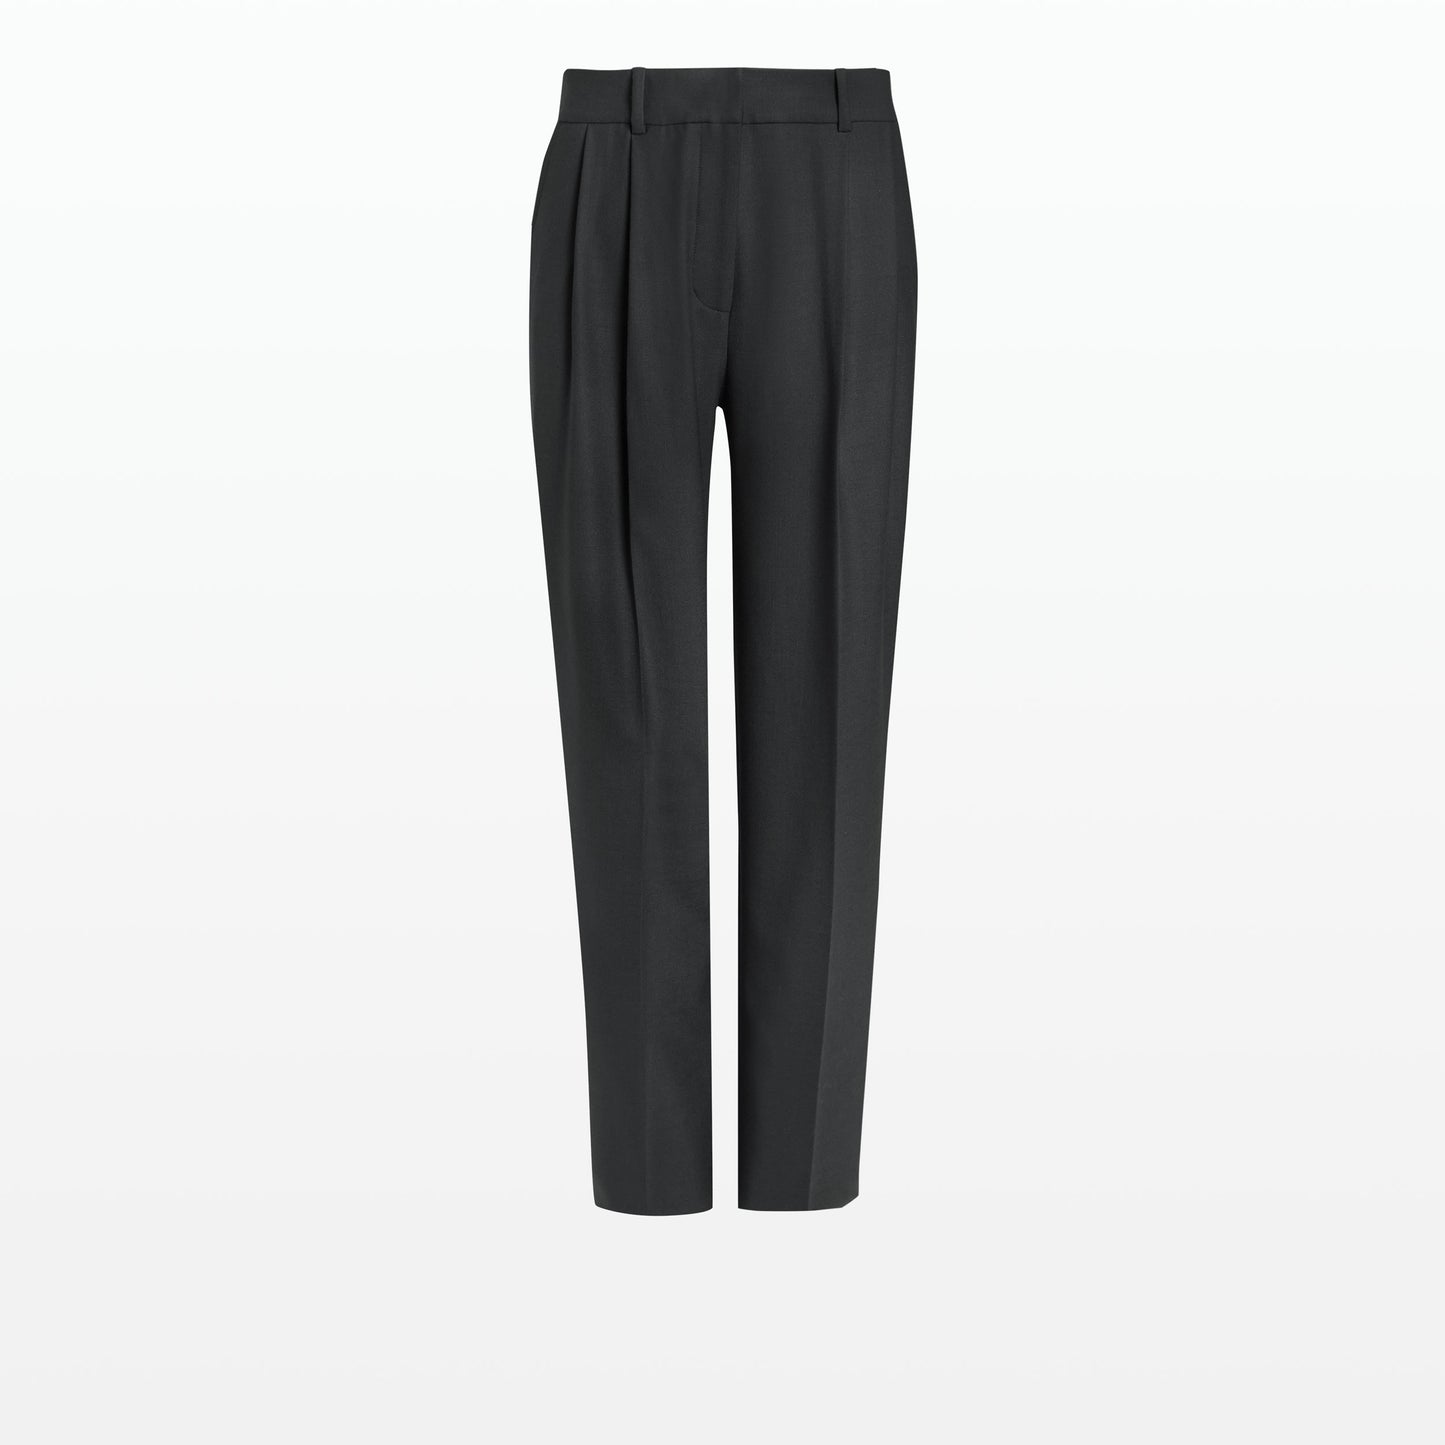 Penelope Charcoal Trousers